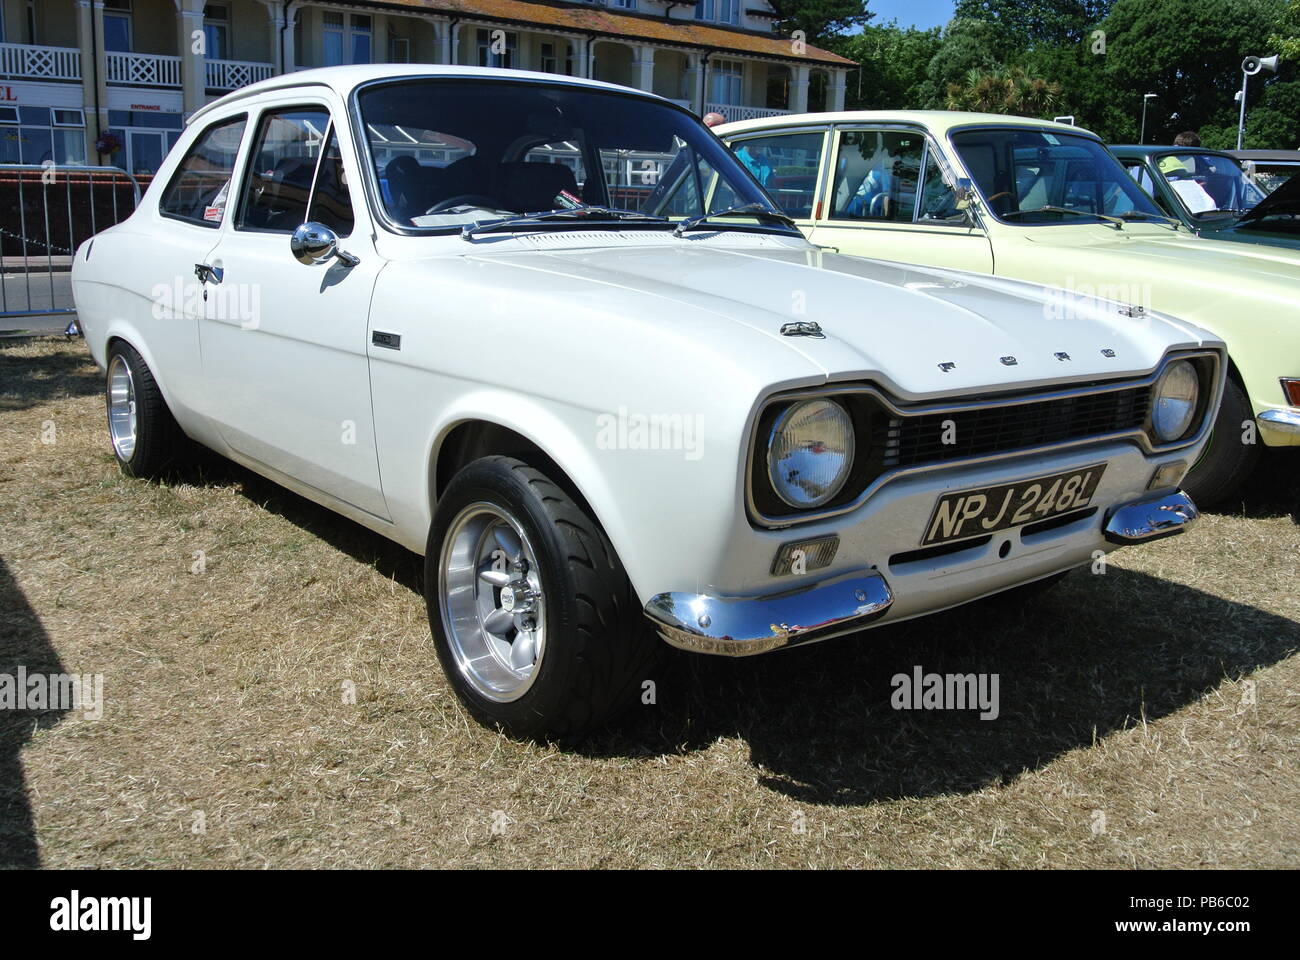 Ford Escort Mk1 parked up on display at the English Riviera classic car show, Paignton, Devon, England, UK Stock Photo